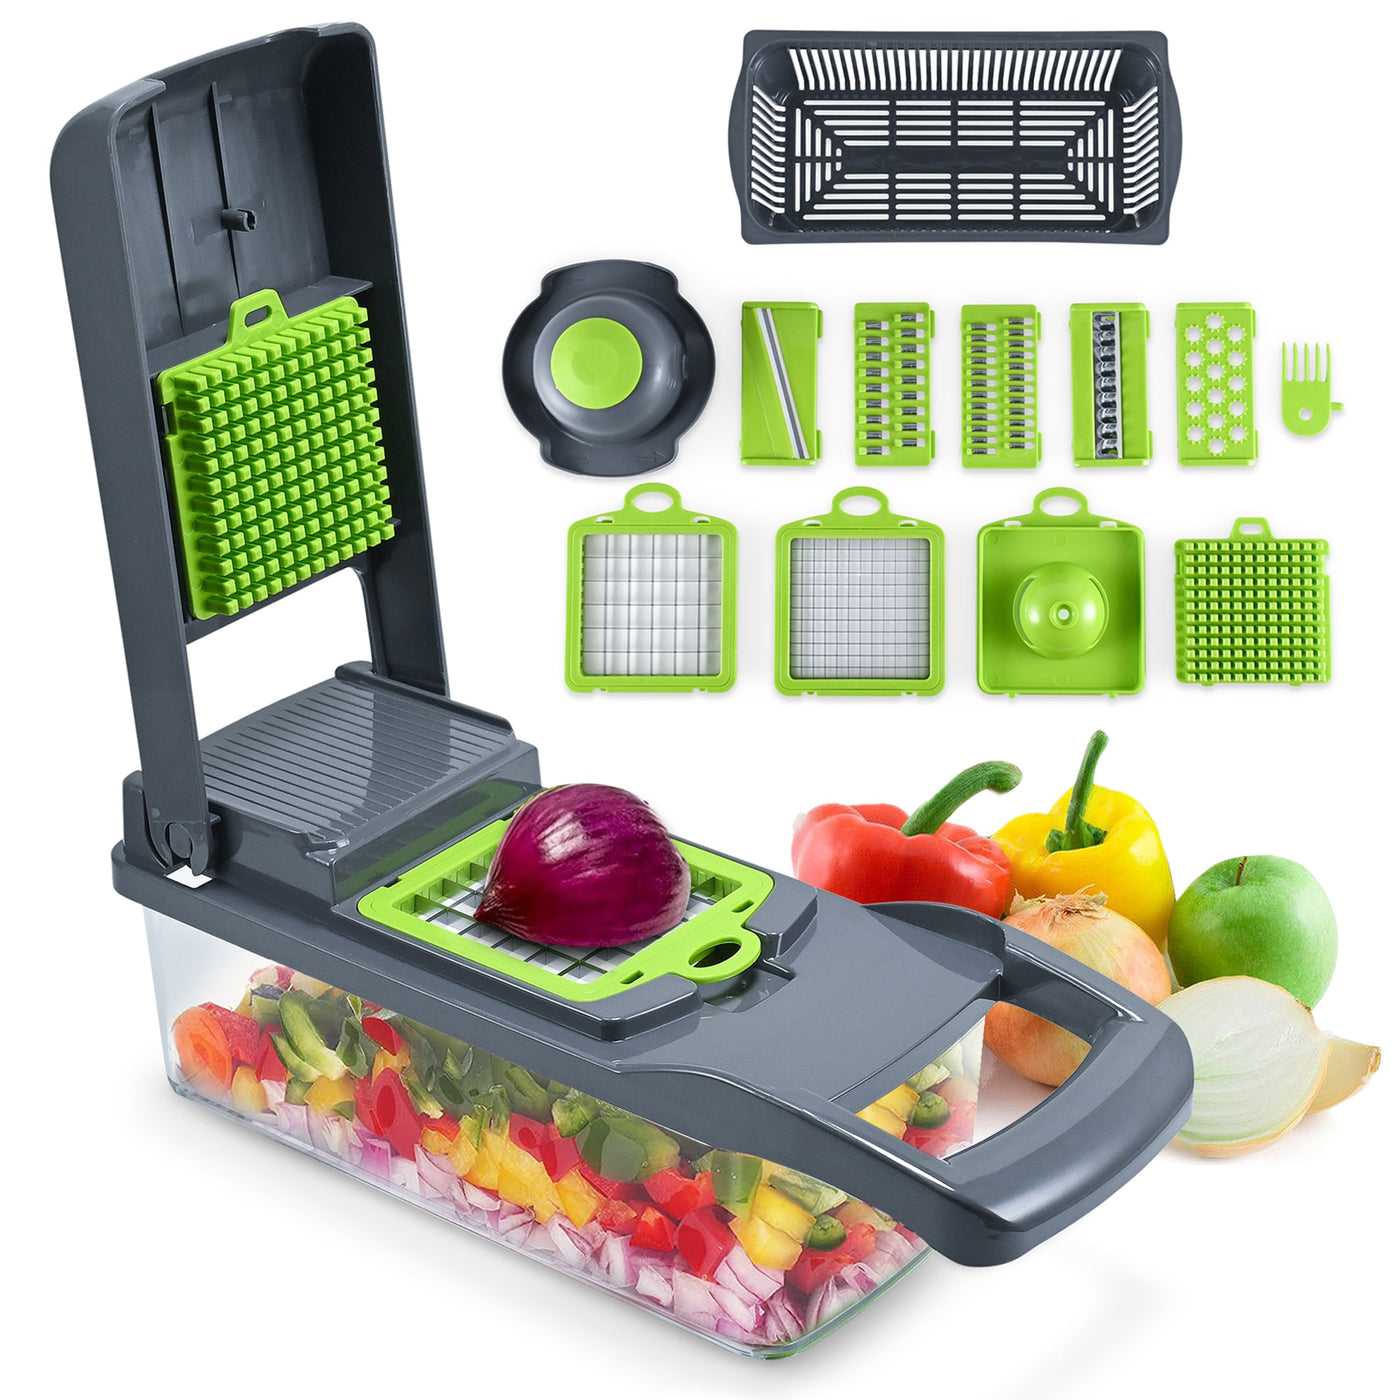 Vegatables Fruits Cutter Chopper Slicer 8 Blades with Container